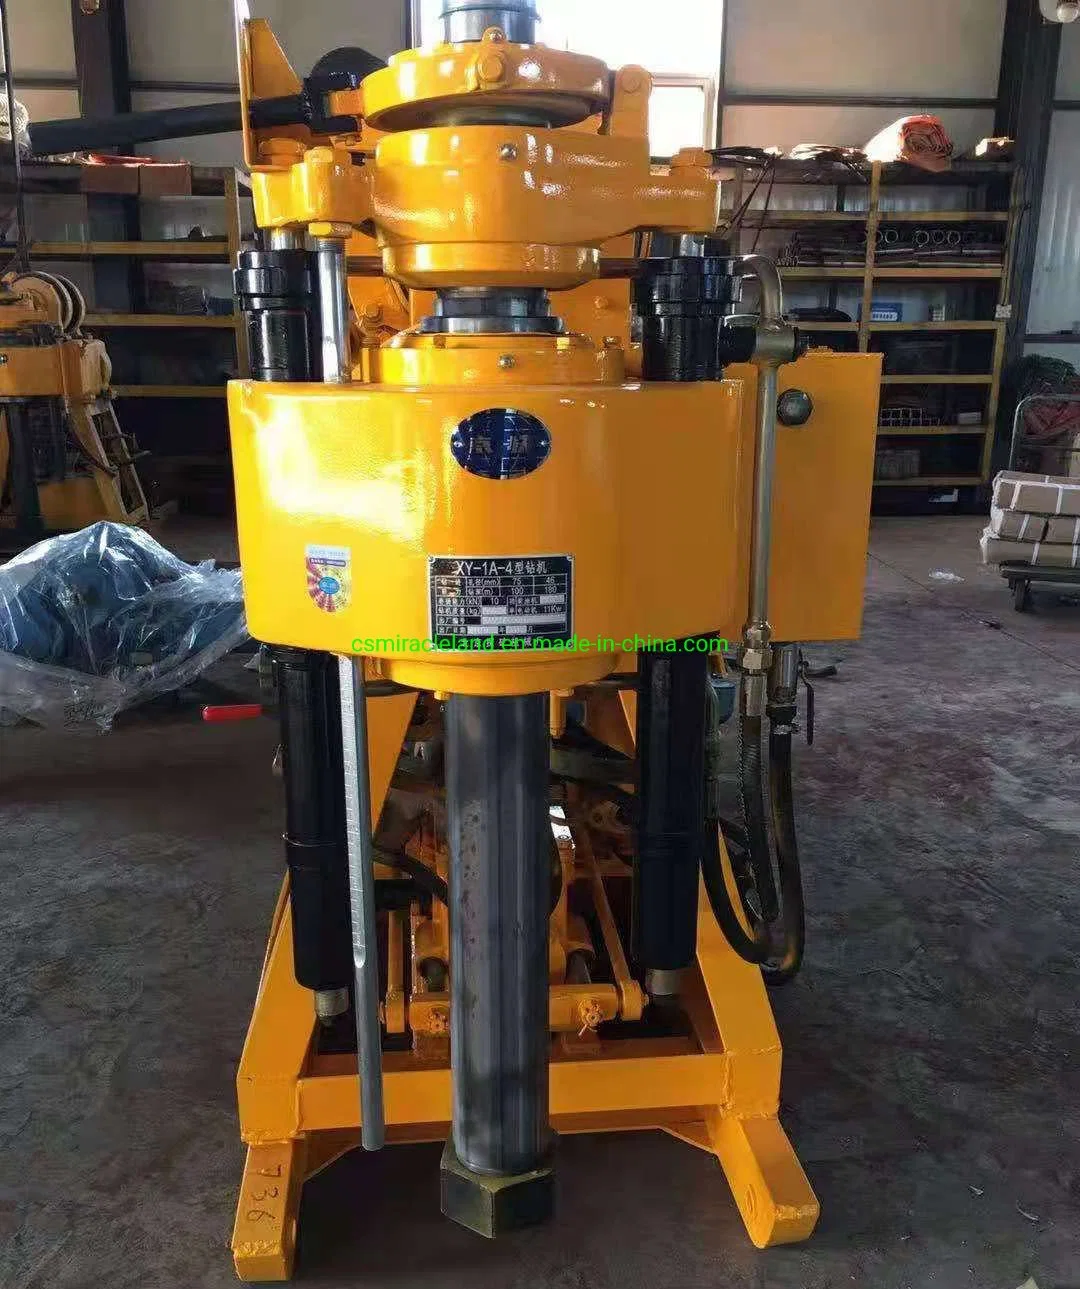 Xy-1A Crawler Mounted Soil Testing/Water Well Drilling/Geotechnical Sample Exploration Hydraulic Core Drill Machine with Mud Pump